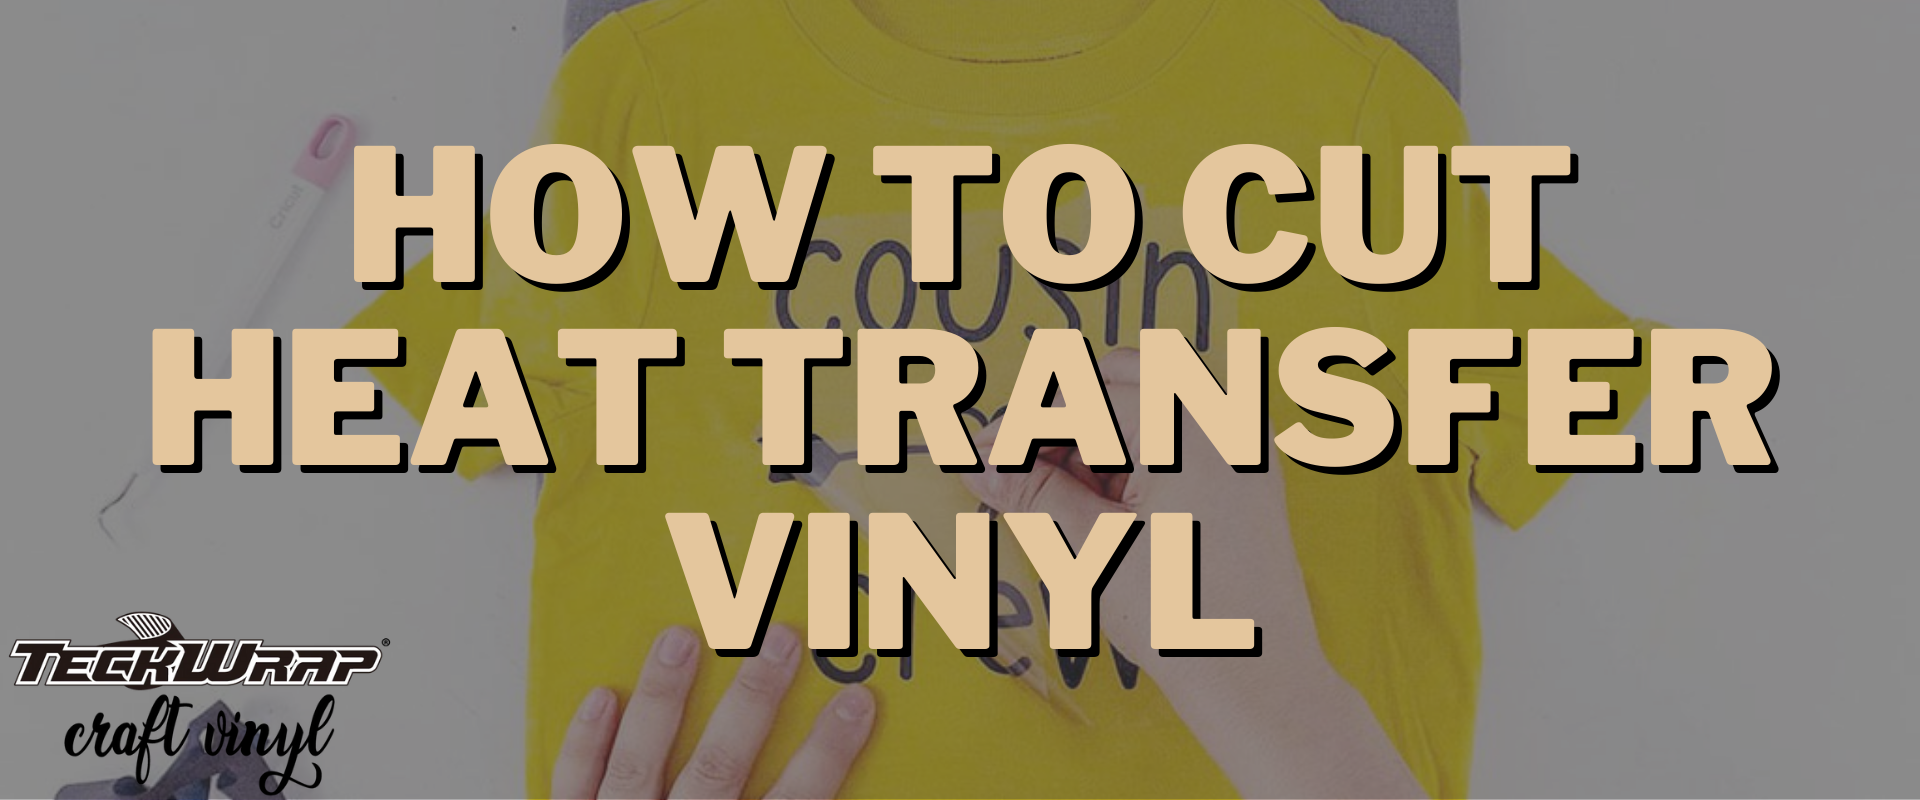 How To Use Heat Transfer Vinyl Without Cricut?– TeckwrapCraft